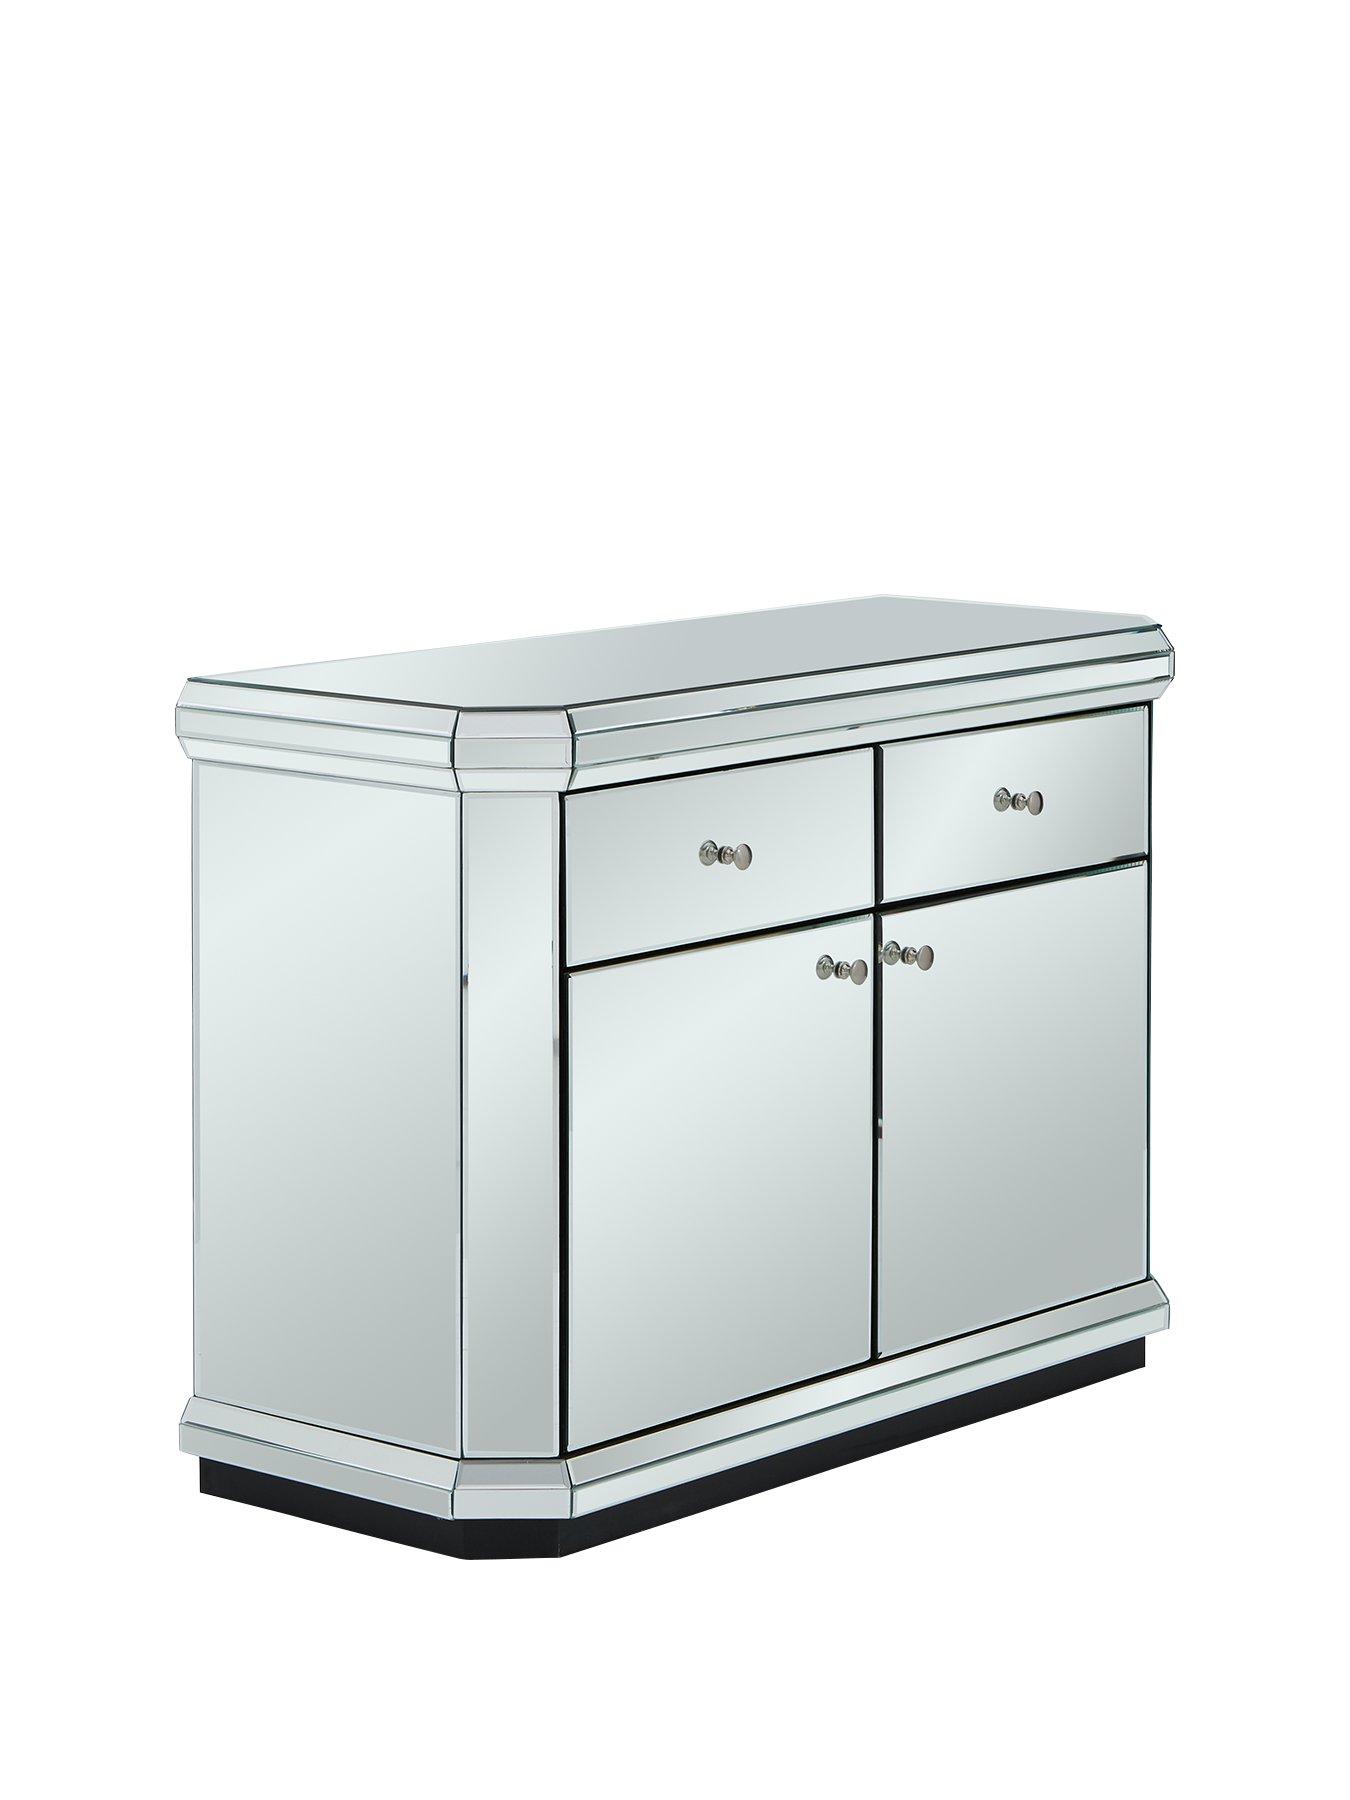 White 3 Door Sideboard Modern Cabinet Cupboard Unit Storage Furniture With 2 Drawers Living Room Display Unit 